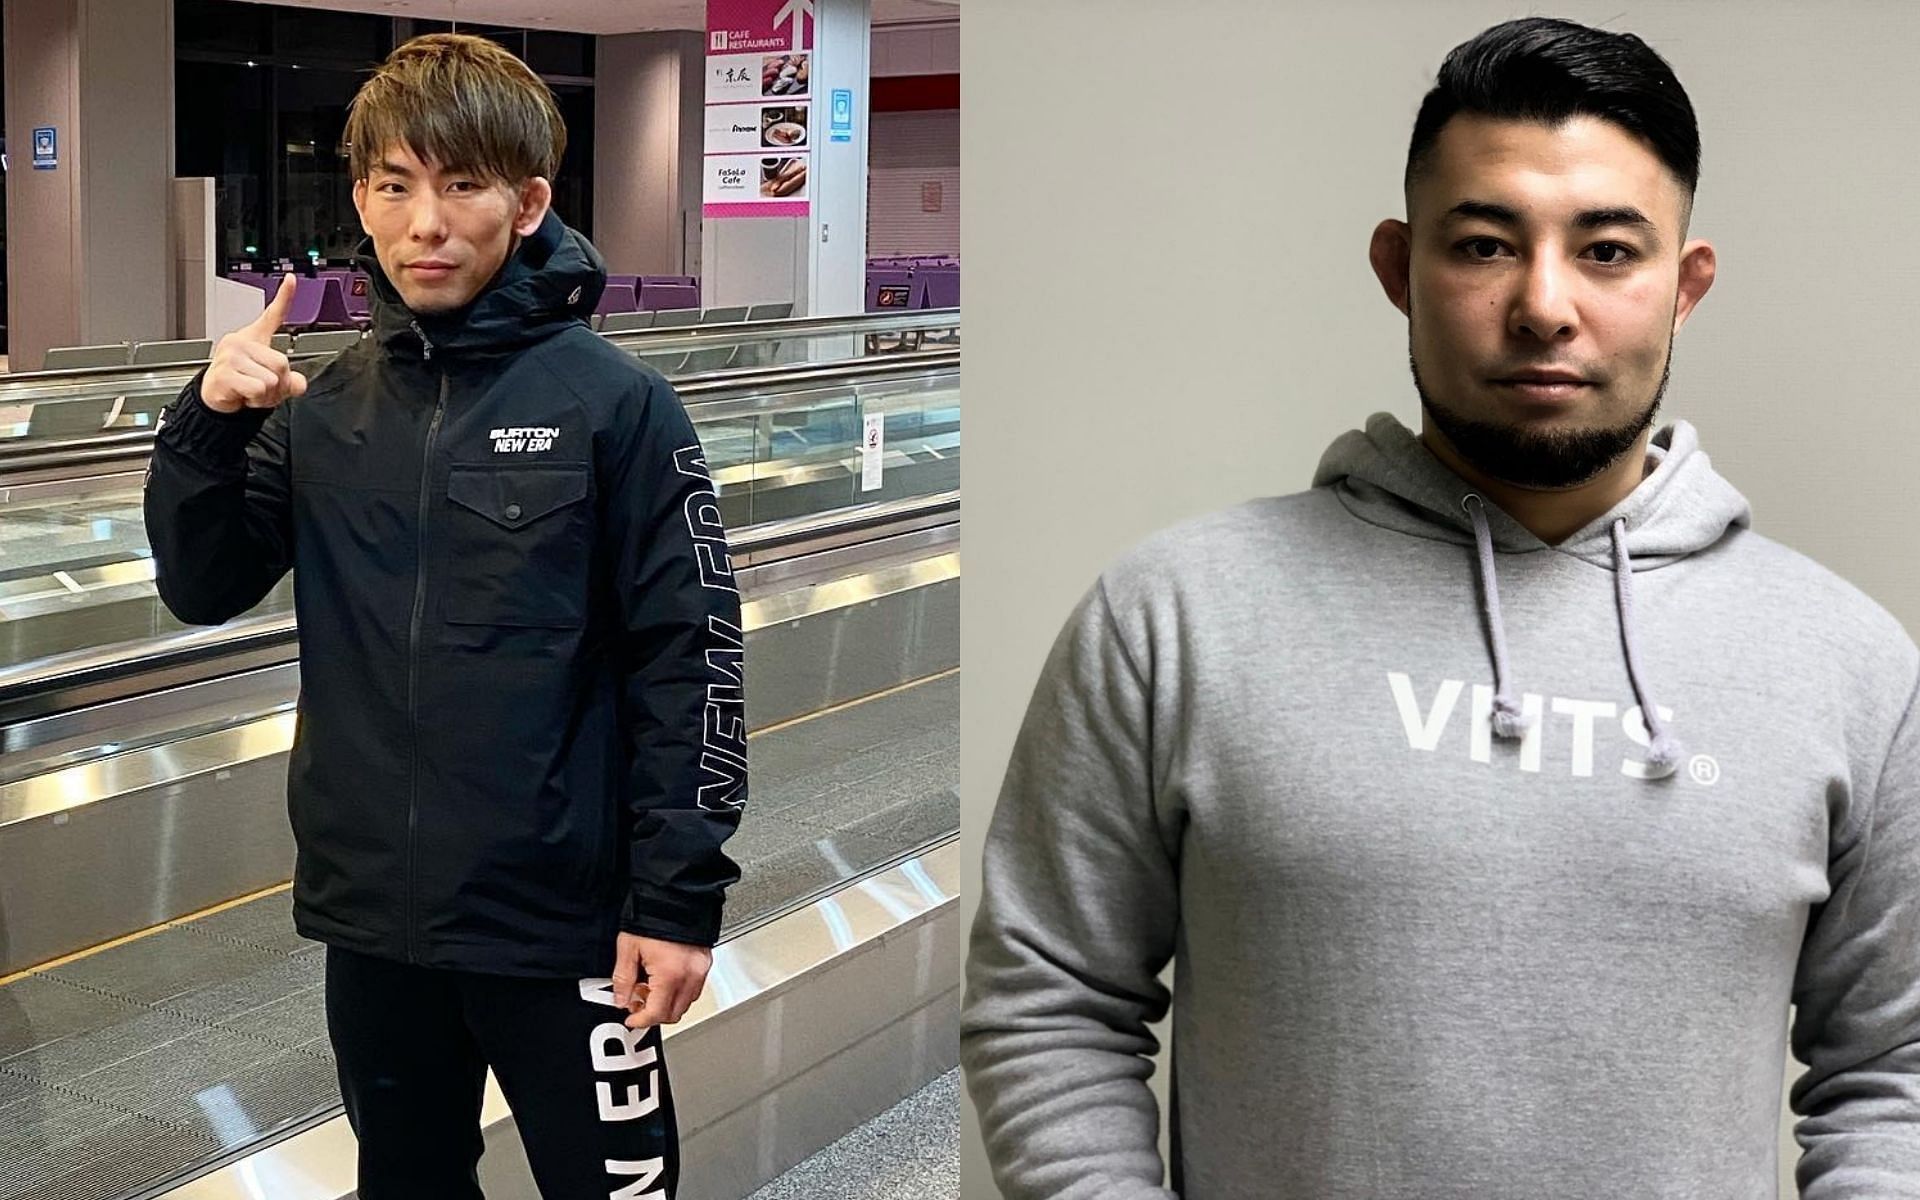 Yosuke Saruta dropped from Bad Blood due to COVID-19 protocols, Ken Hasegawa also out due to injury. [Photos: Yosuke Saruta, Ken Hasegawa on Instagram]